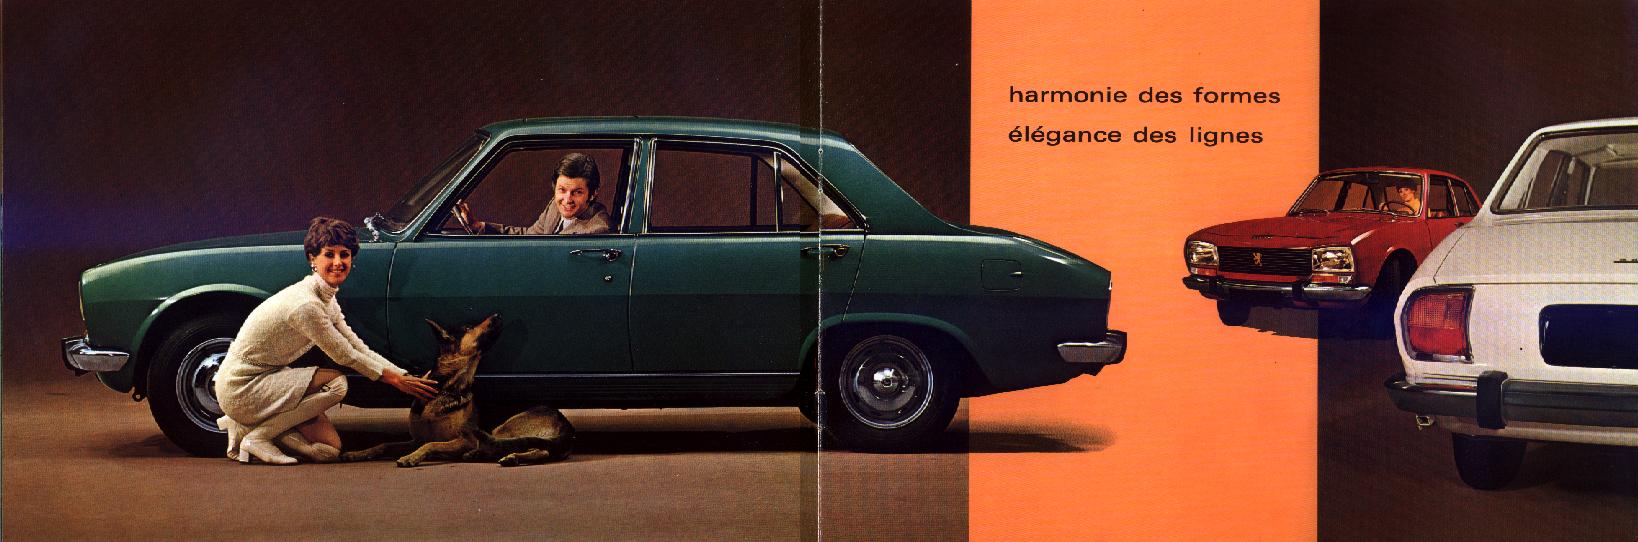 The Peugeot 504 in the press